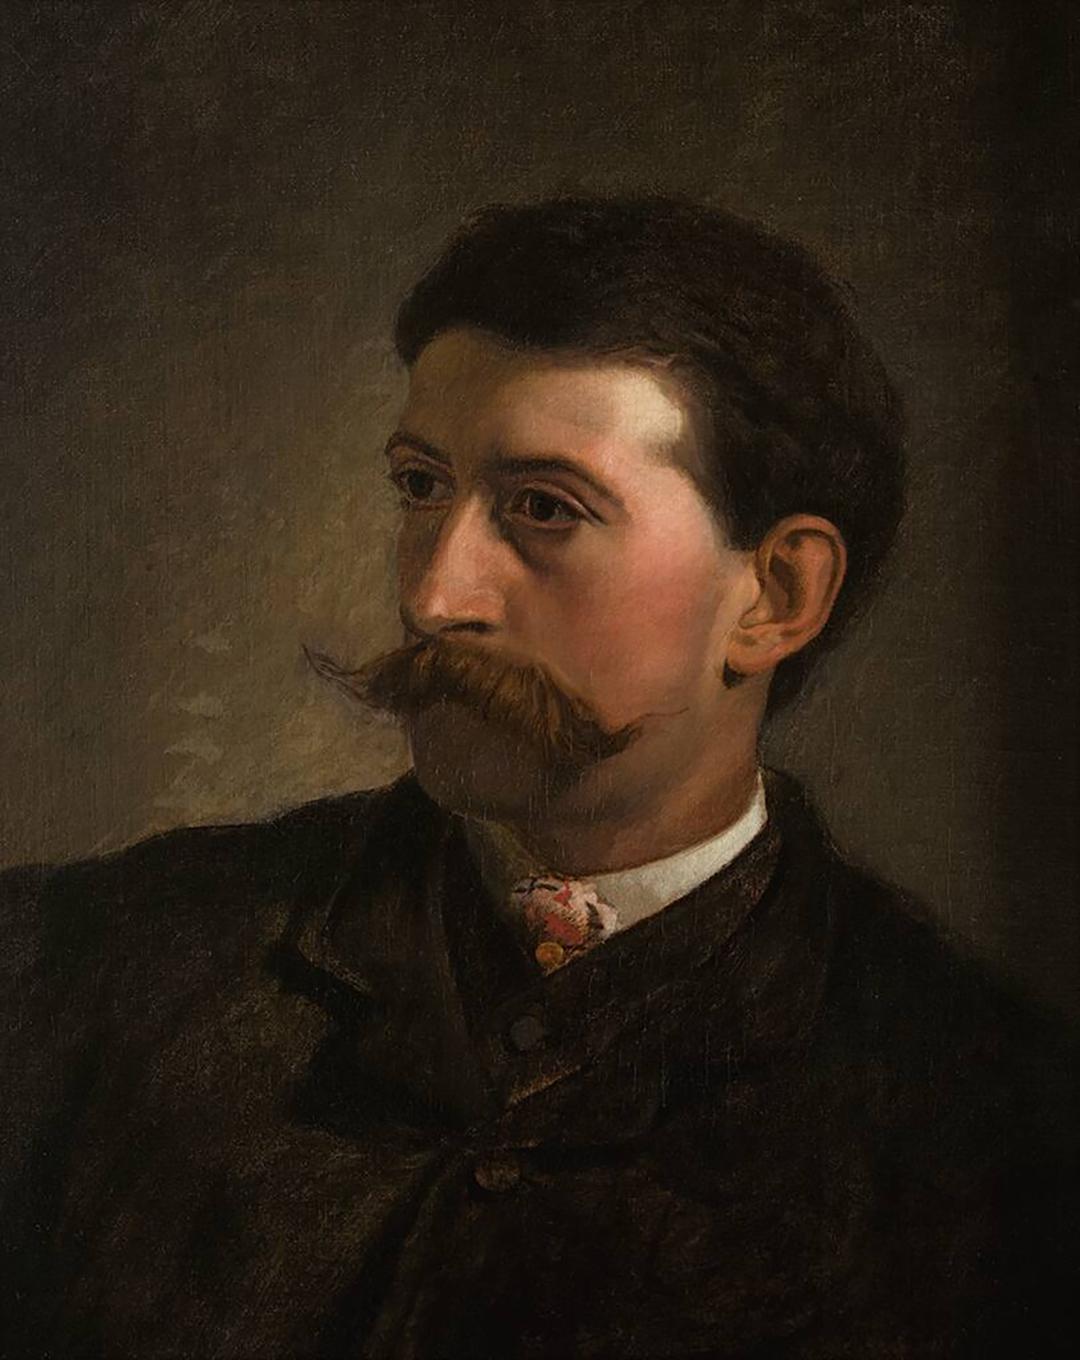 A portrait of Winslow Homer, 1865, by Oliver Ingraham Lay. Oil on canvas; 20 1/8 inches by 16 1/8 inches. National Academy of Design, New York. (Public Domain)